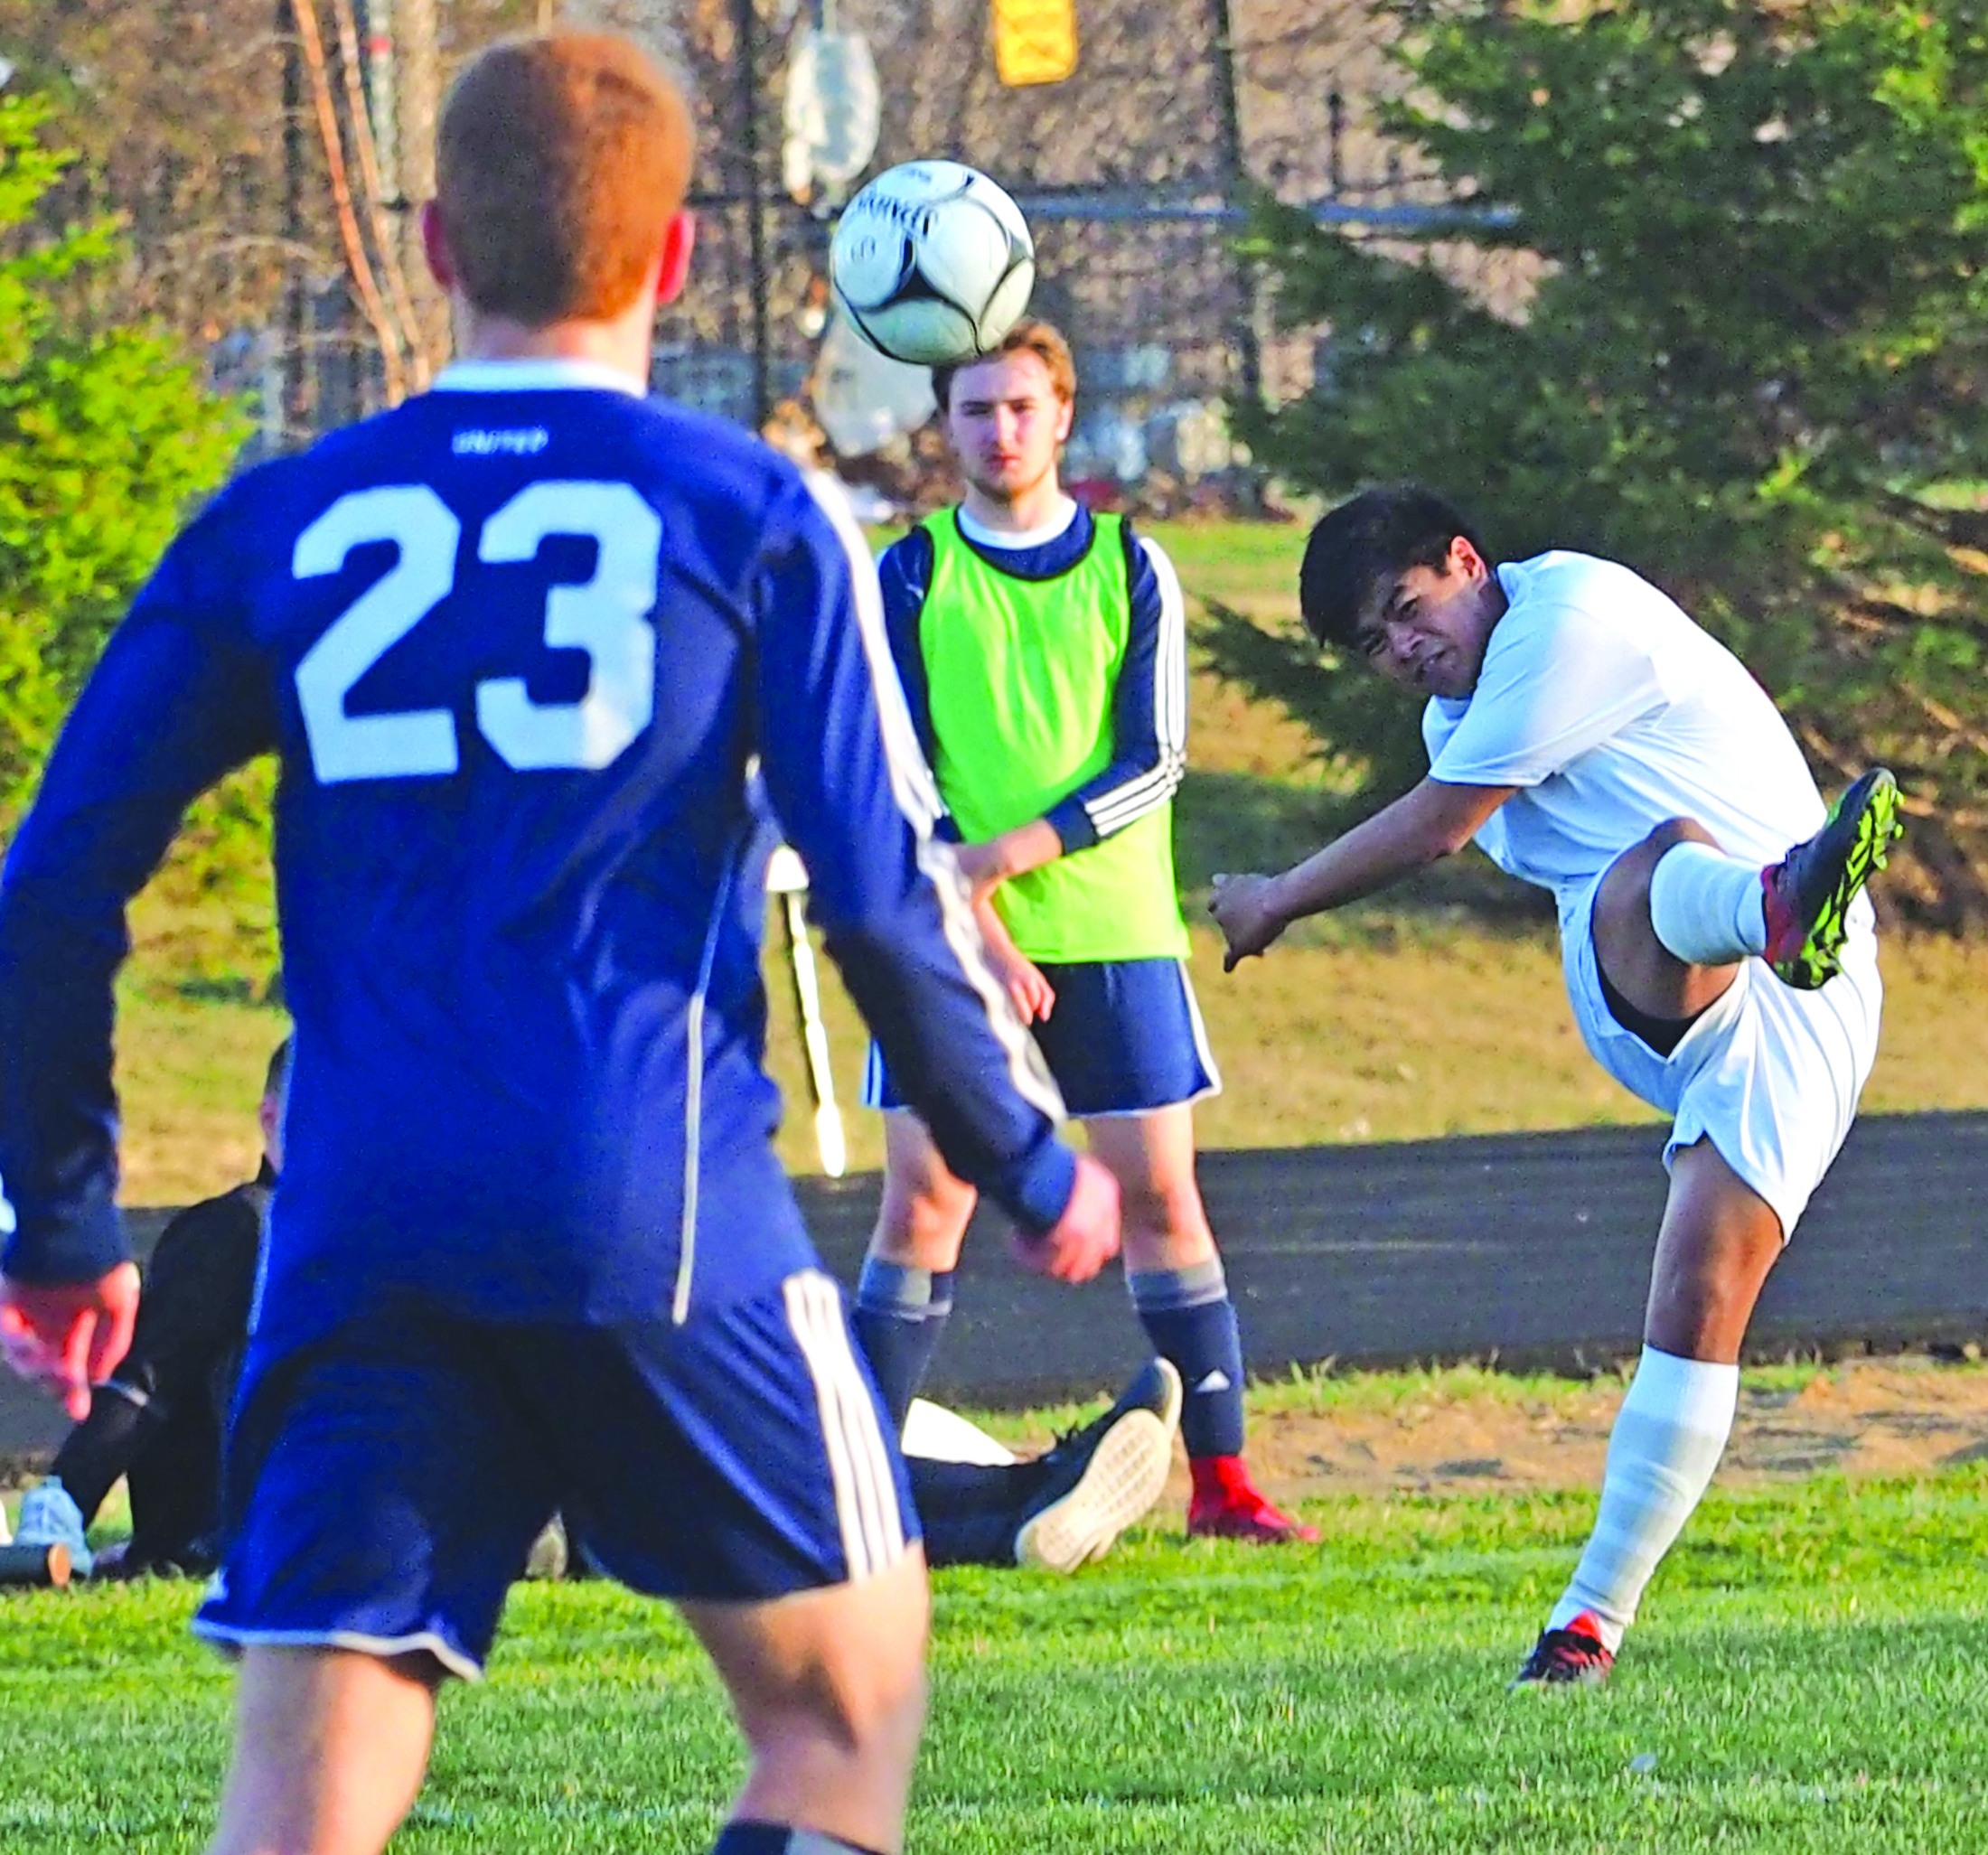 Comet soccer coach still hopeful for continued progress this spring